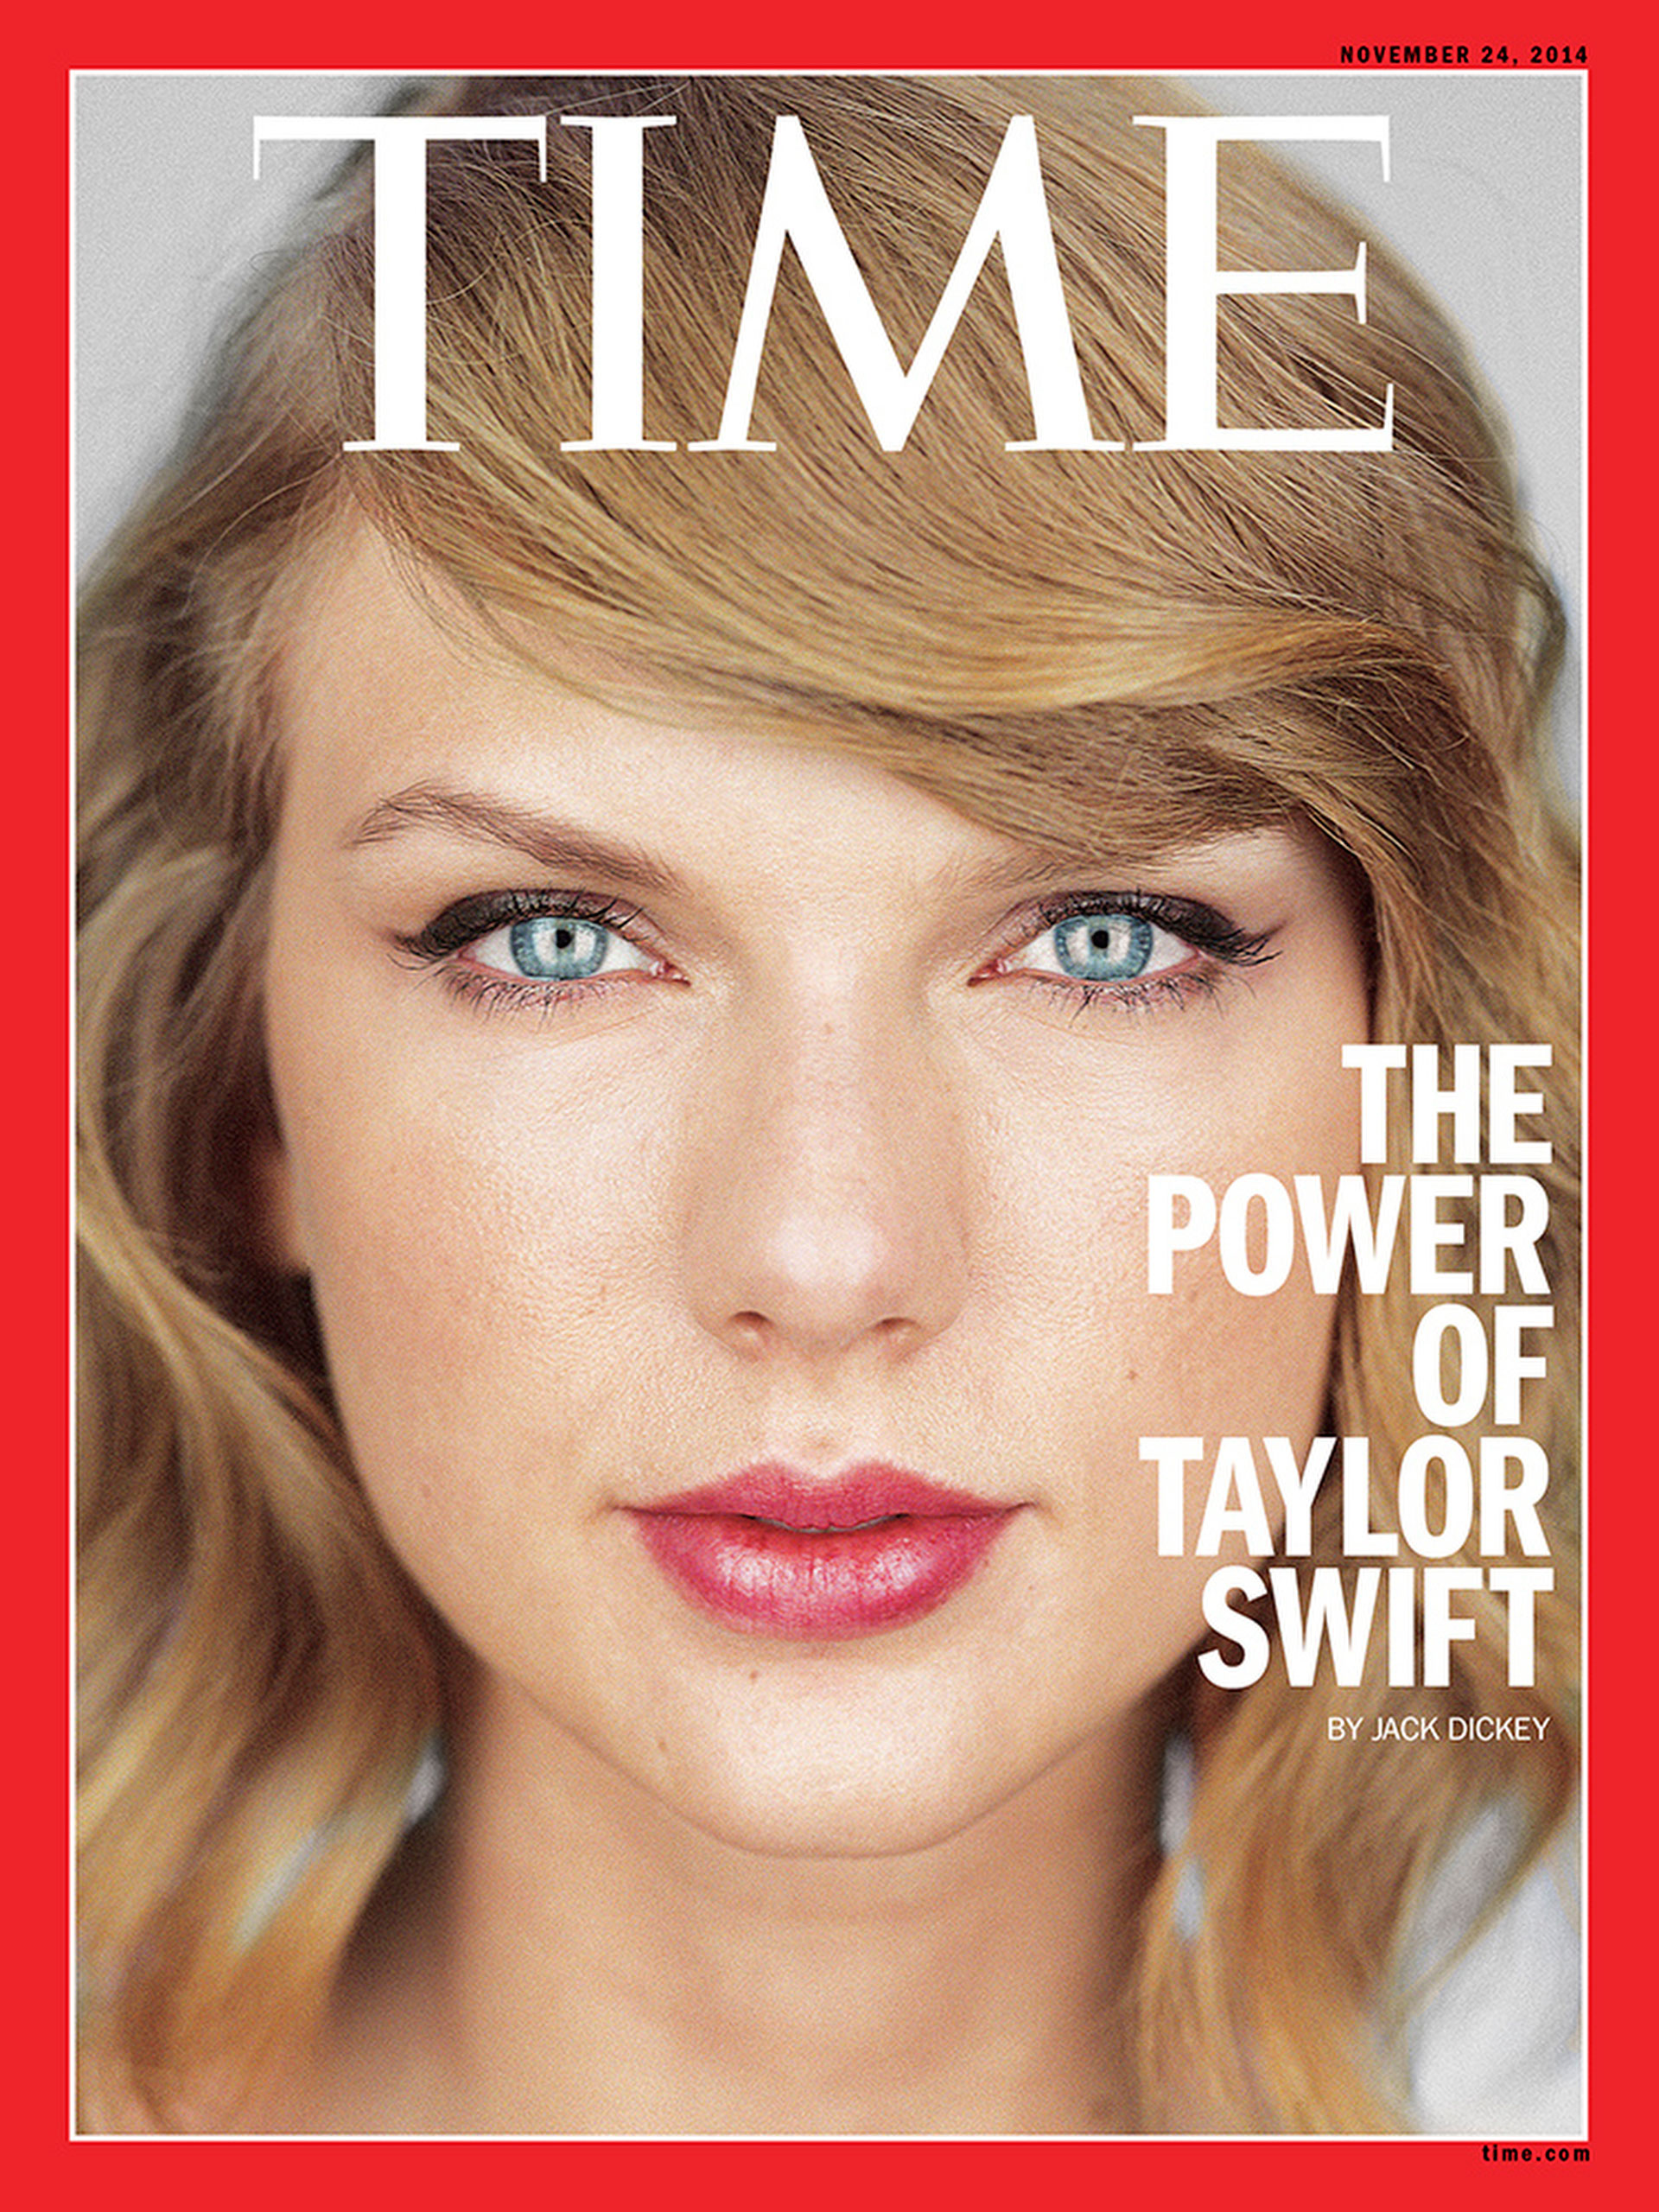 The Nov. 24, 2014 cover of TIME.